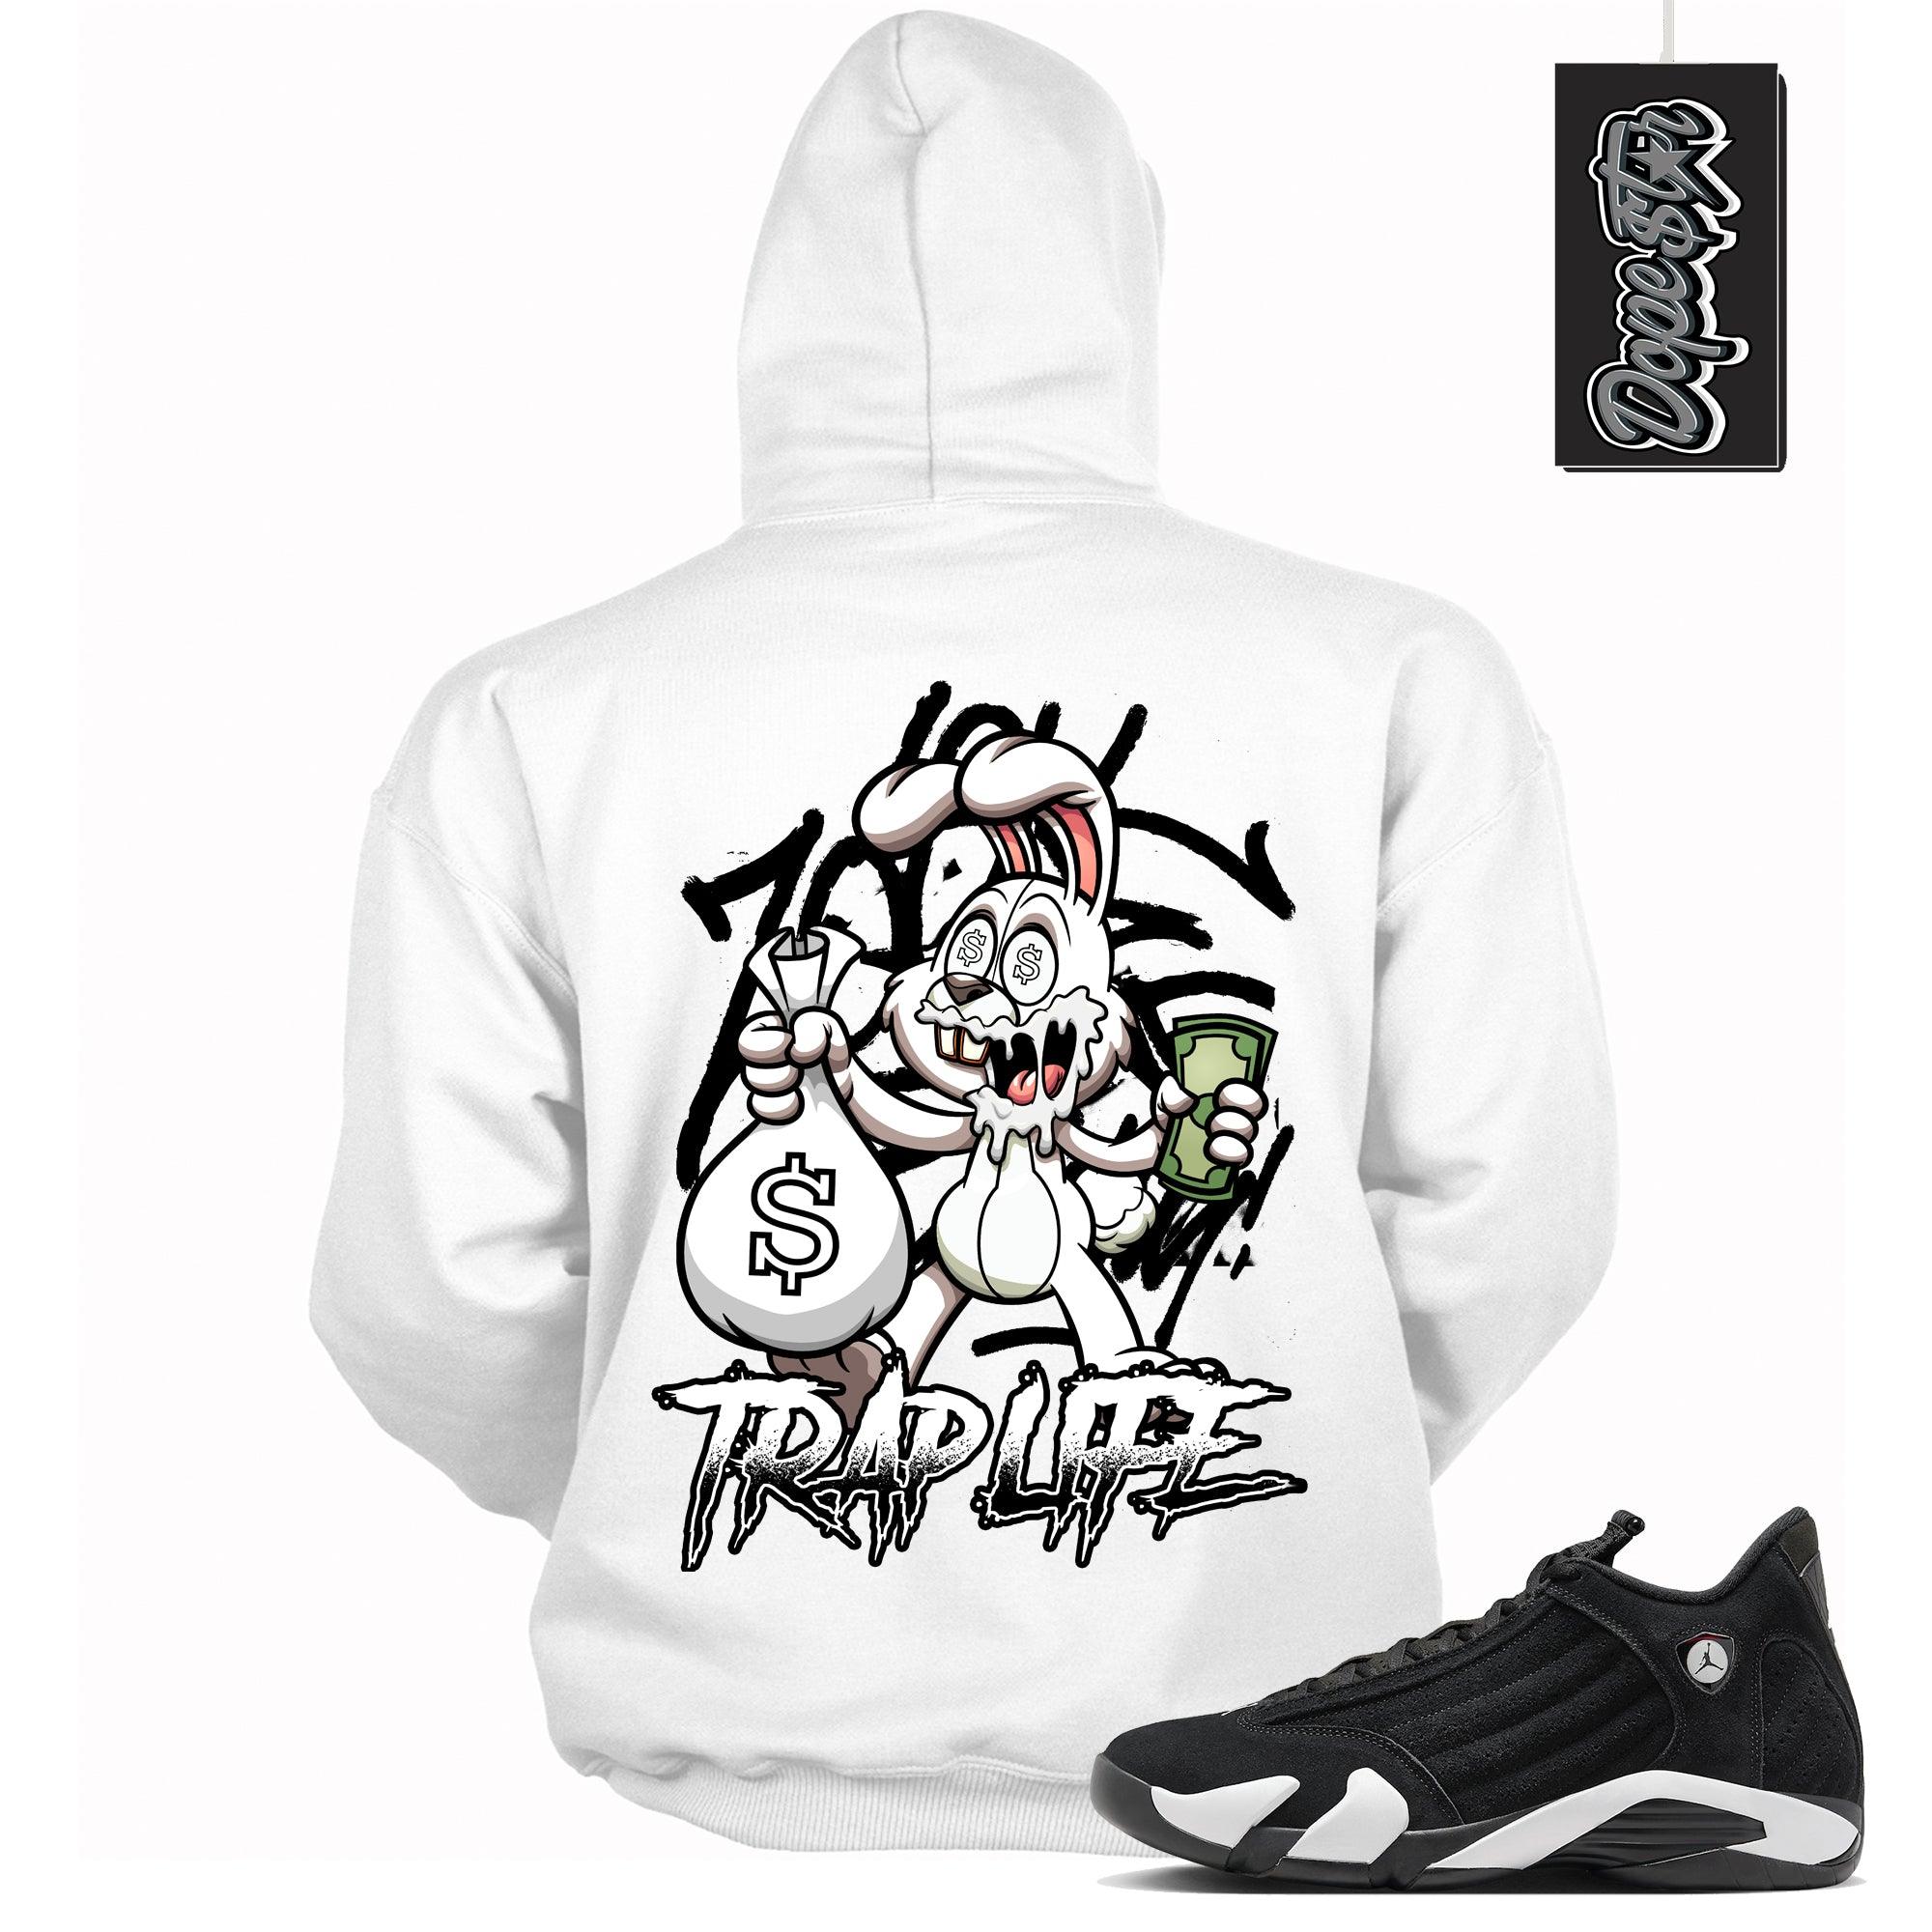 Cool White Graphic Hoodie with “ Trap Life “ print, that perfectly matches Air Jordan 14 Black & White  sneakers